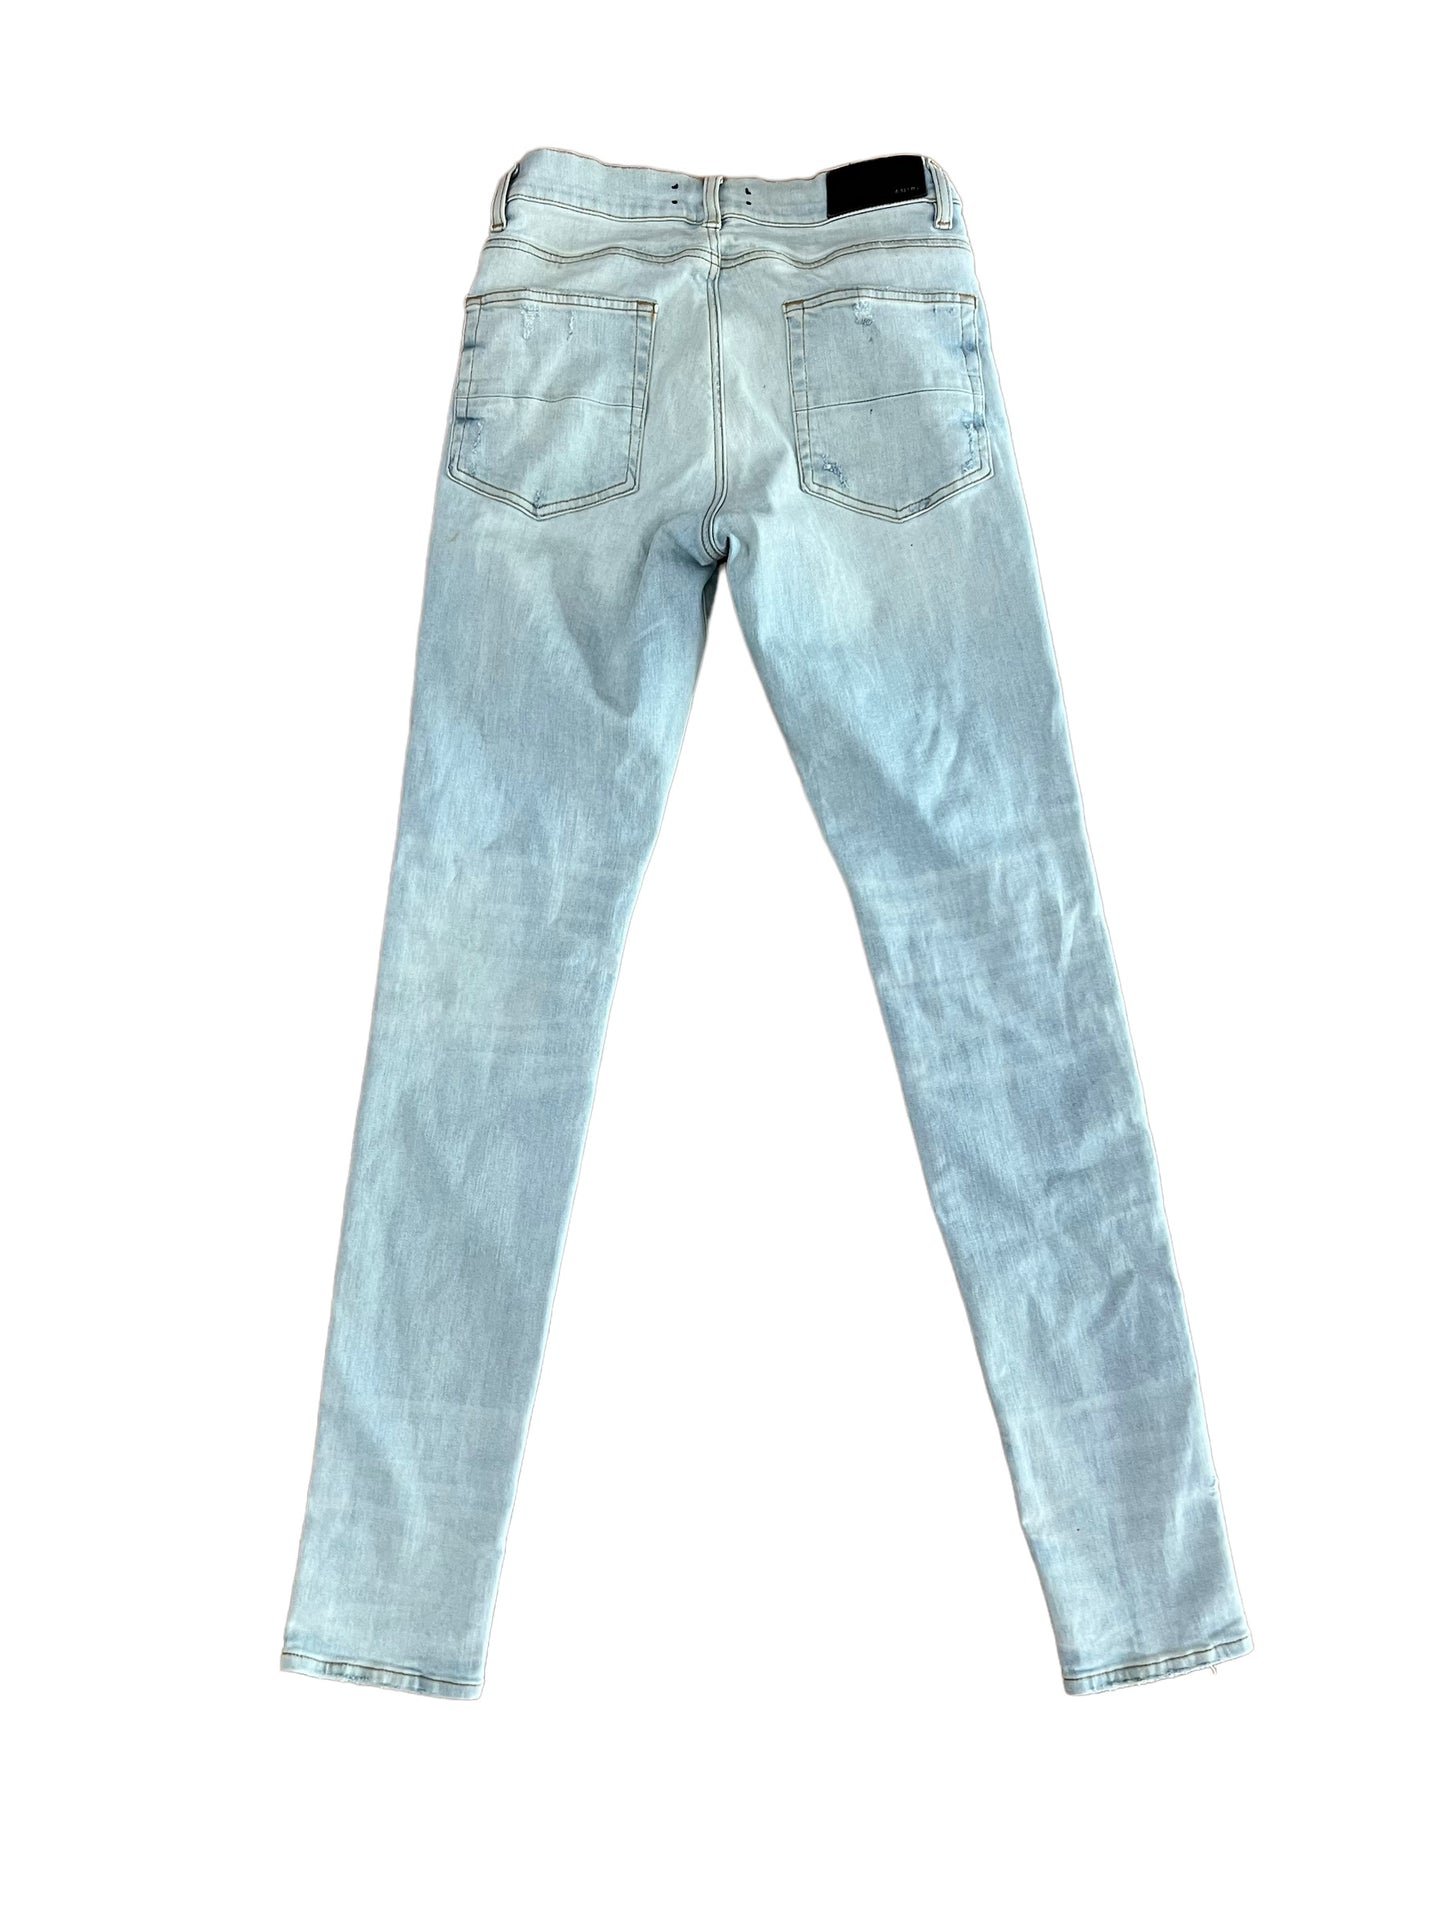 Amiri Blue Stack Jeans size 31 pre-owned